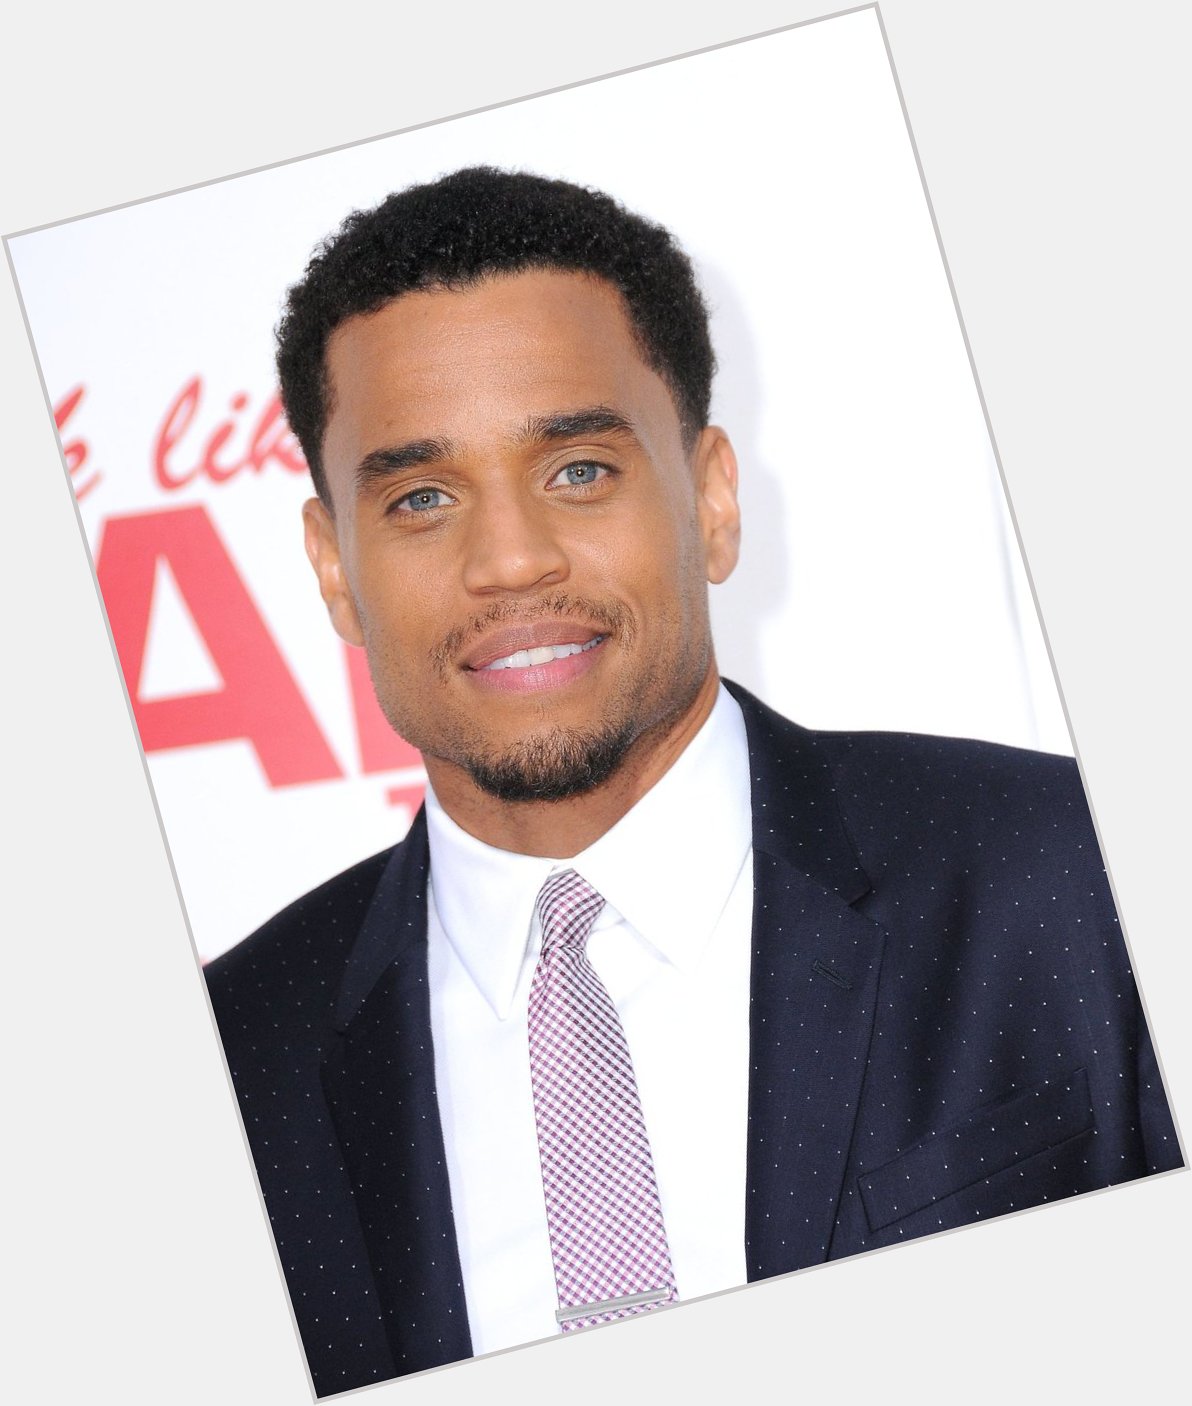 Happy birthday to our brotha Michael Ealy 